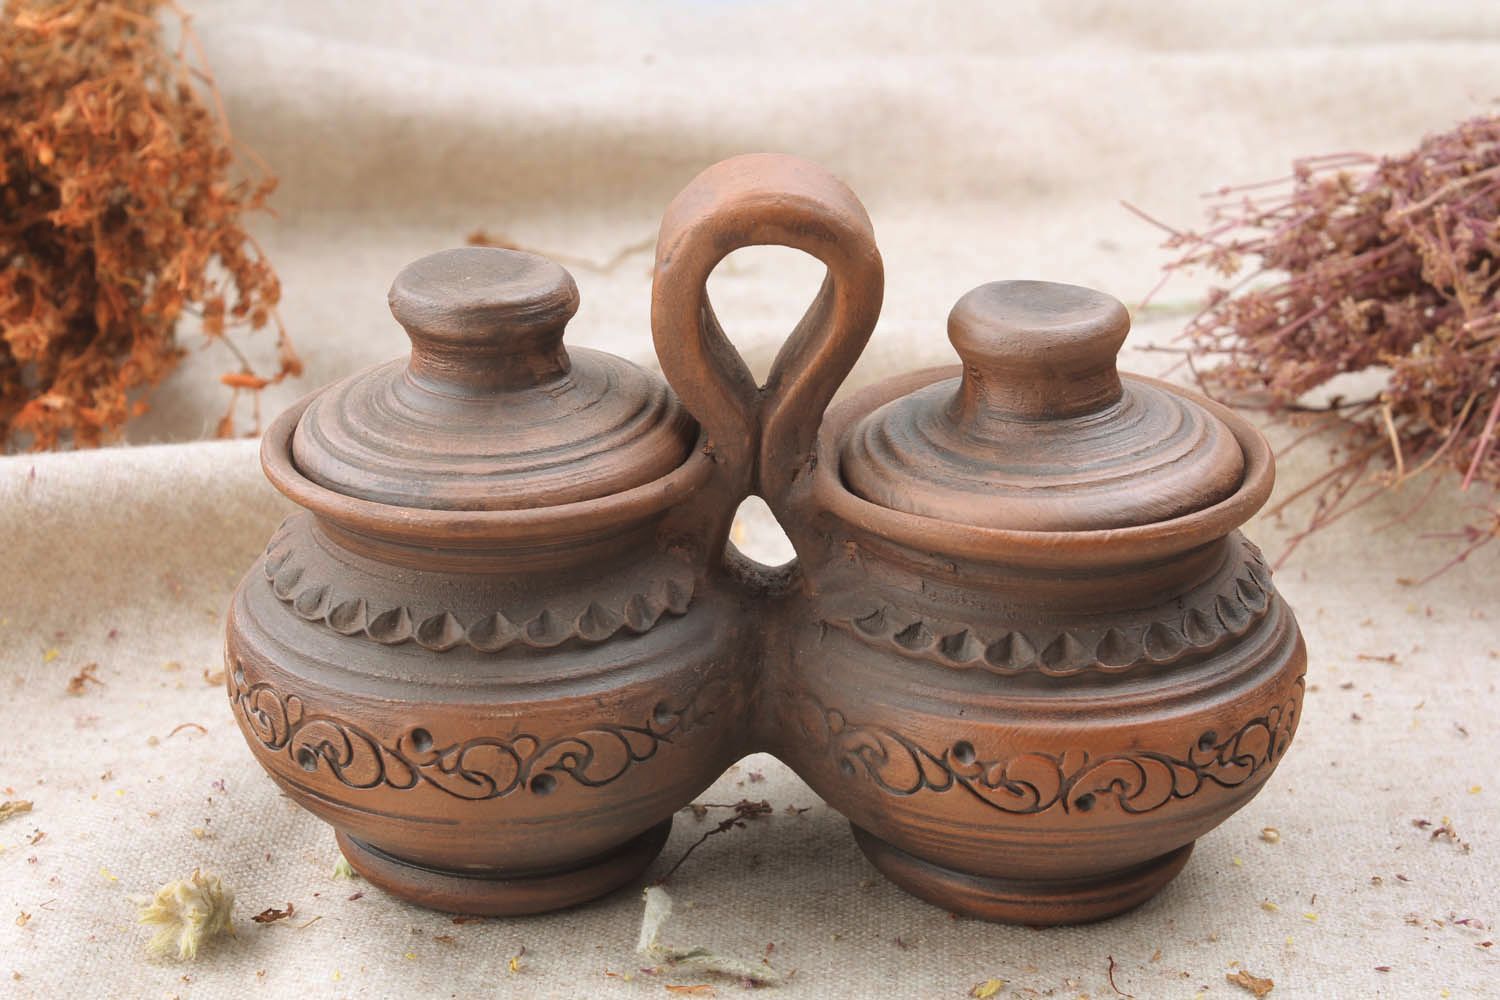 Salt cellar and pepper shaker made of clay  photo 1